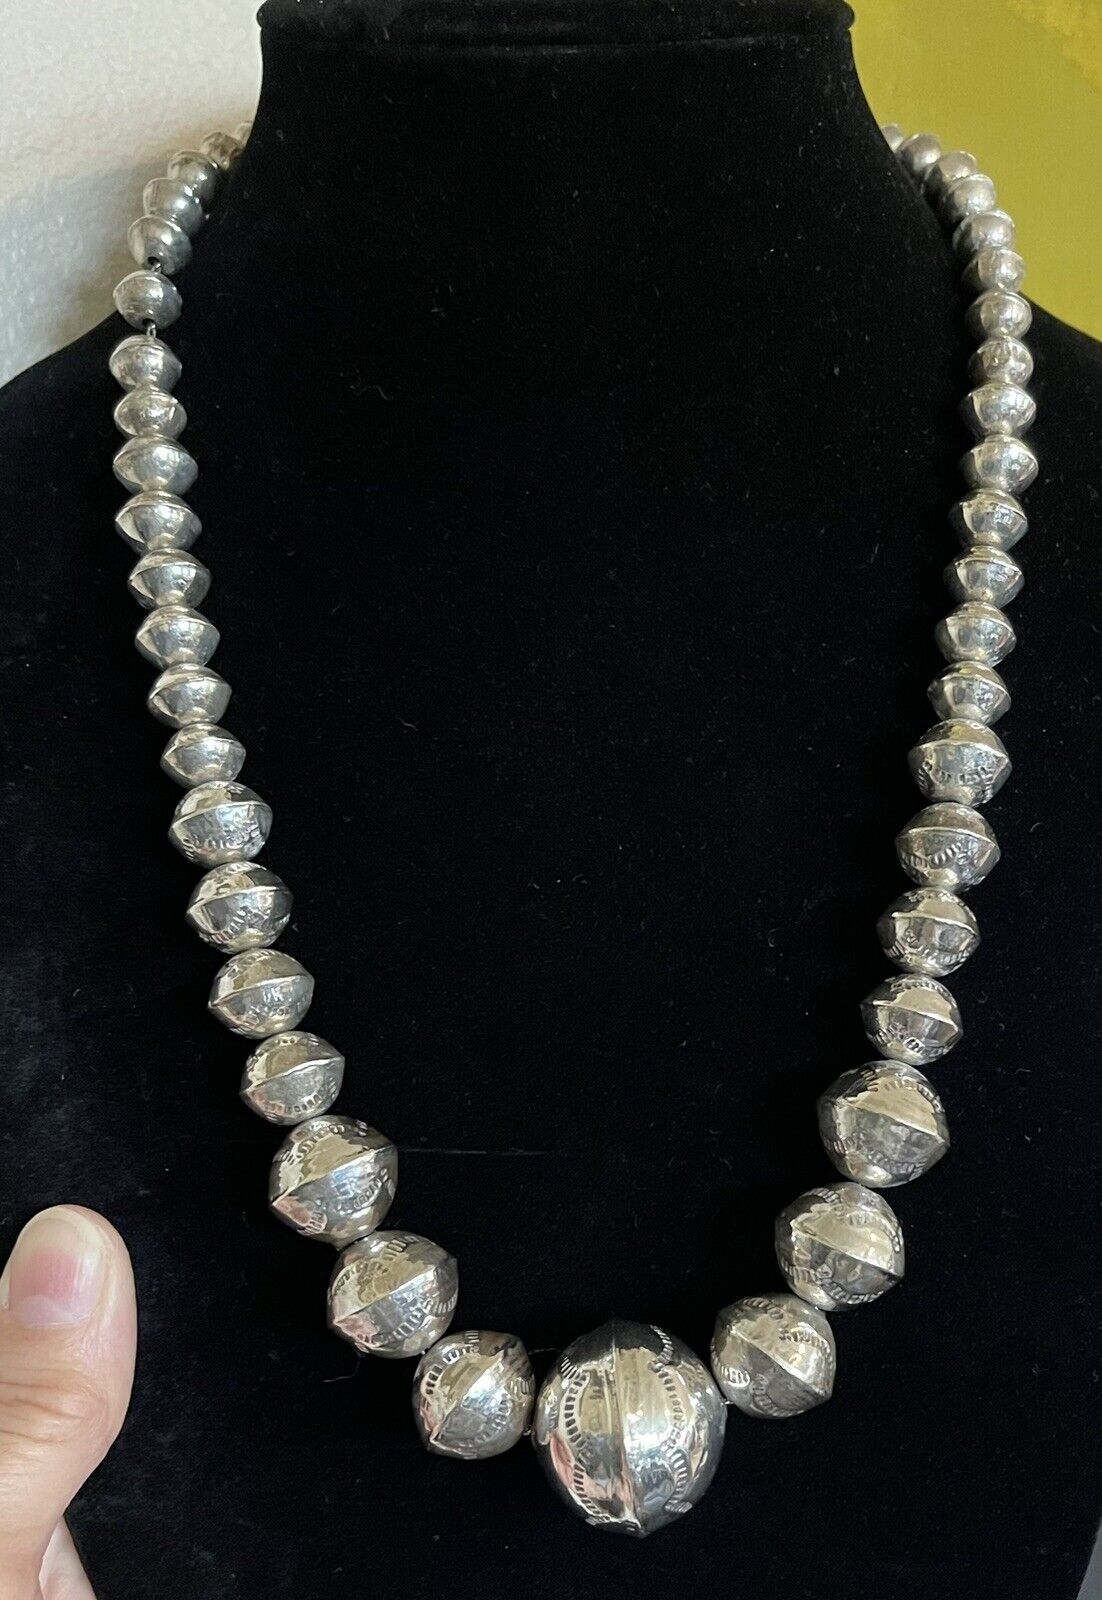 Vintage Navajo Pearls Large Stamped Graduated Beads Sterling Silver 24 inch